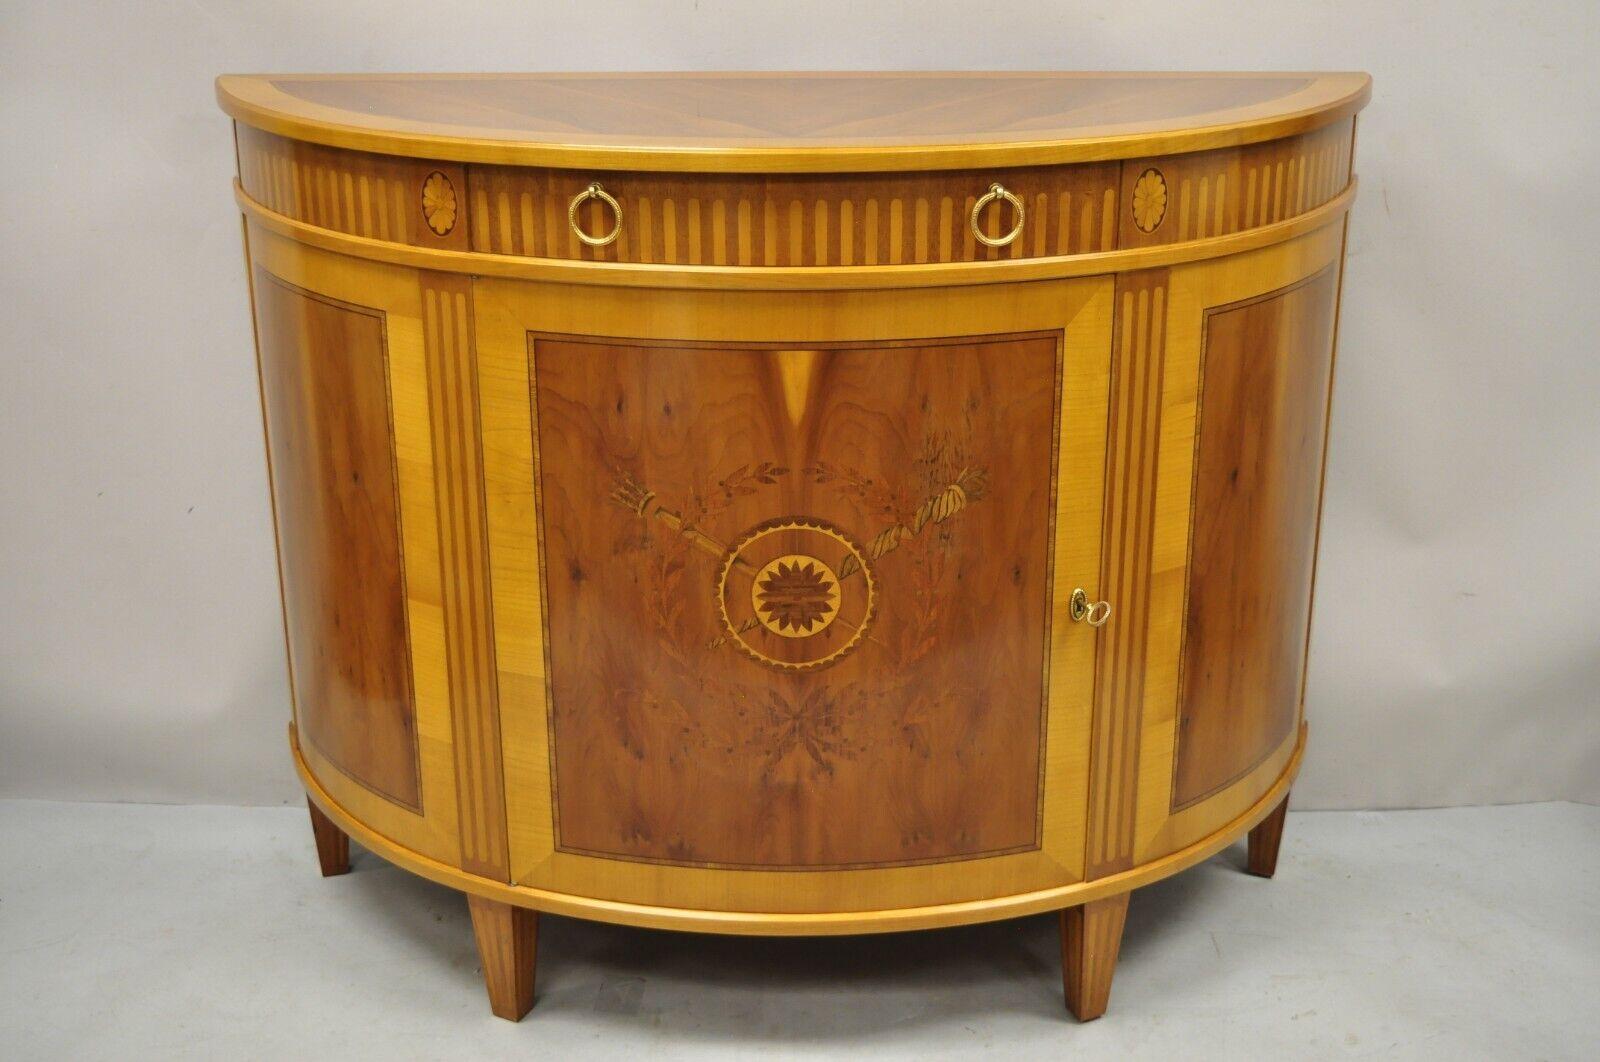 Colombo Mobili French Louis XVI Yew Wood Inlay Demilune Commode Cabinet, a Pair 4